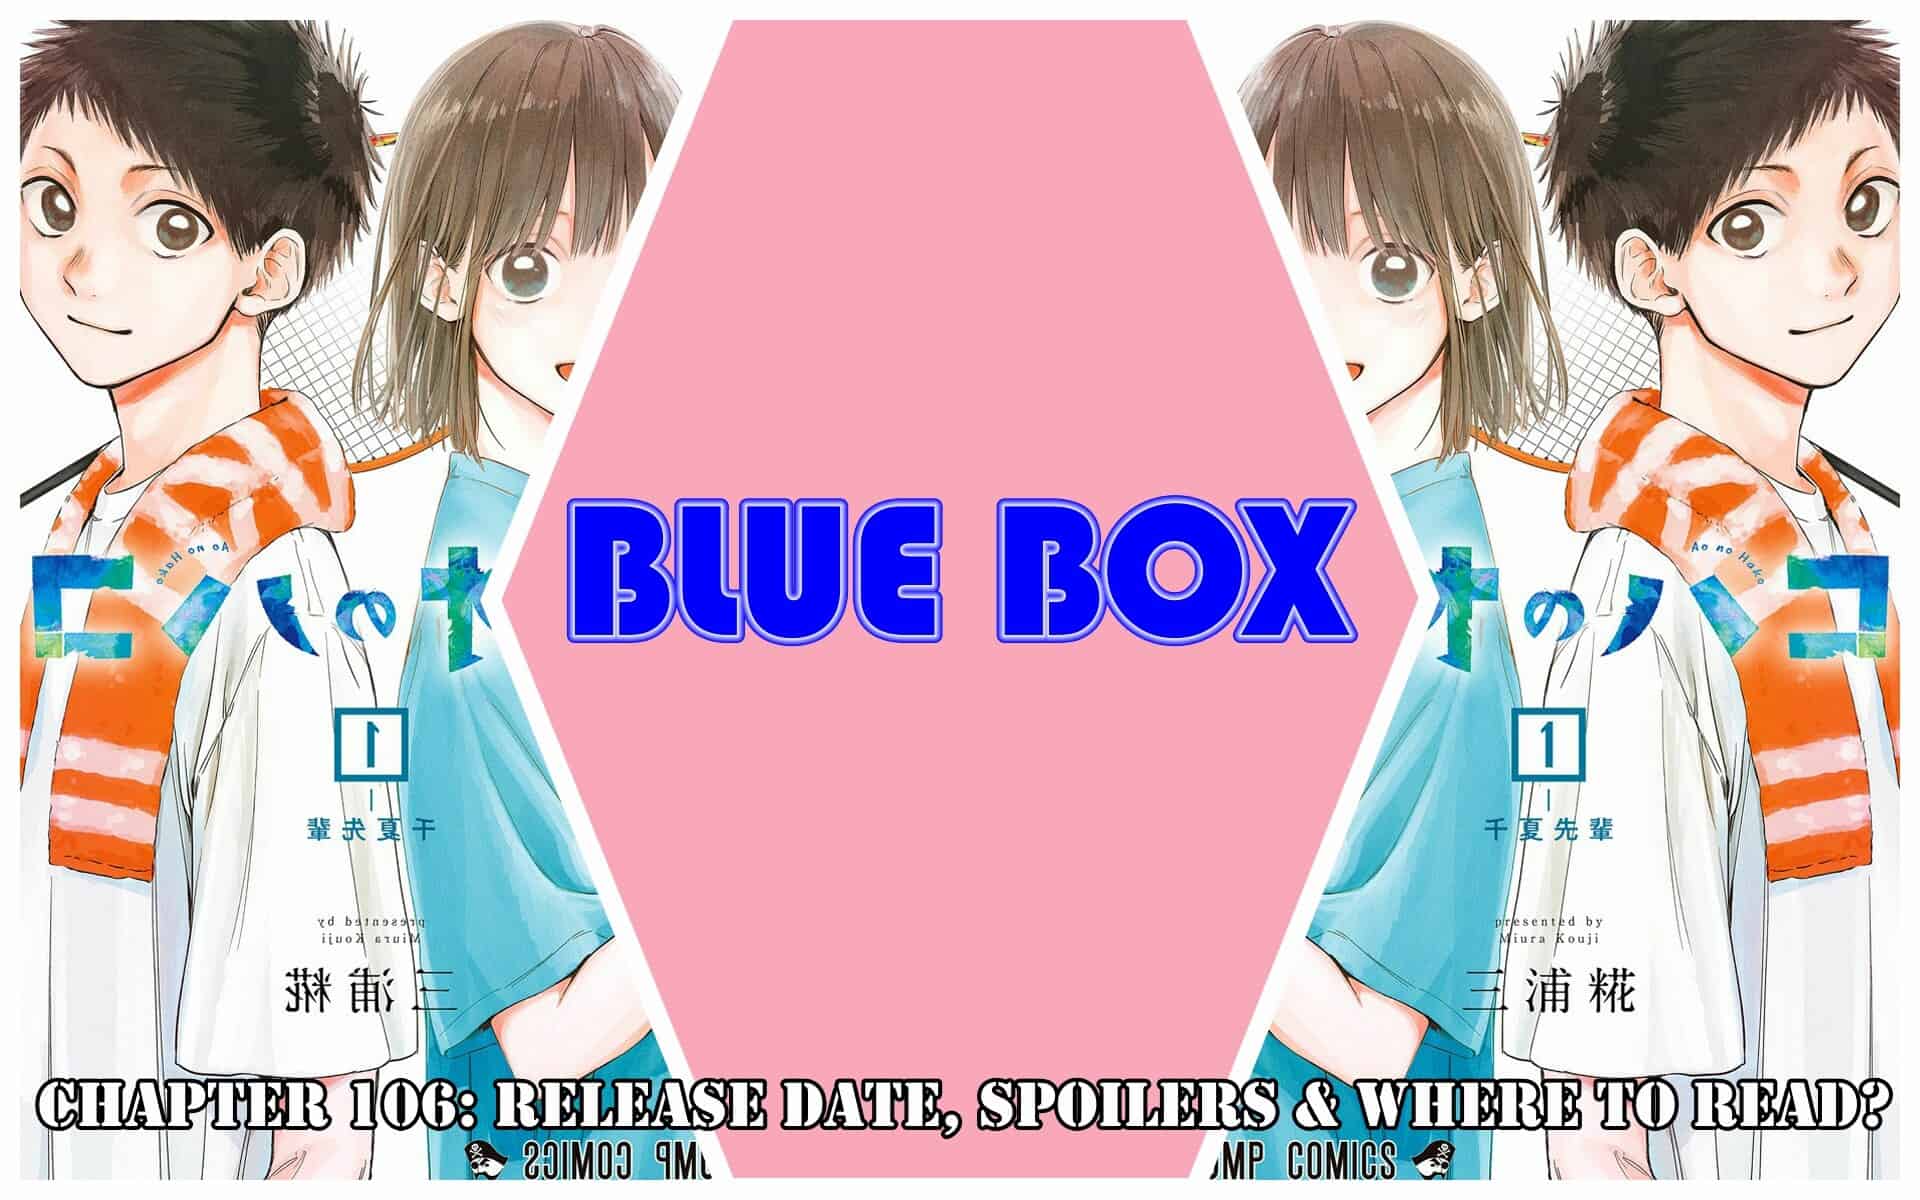 Blue Box Chapter 106: Release Date, Spoilers & Where to Read?